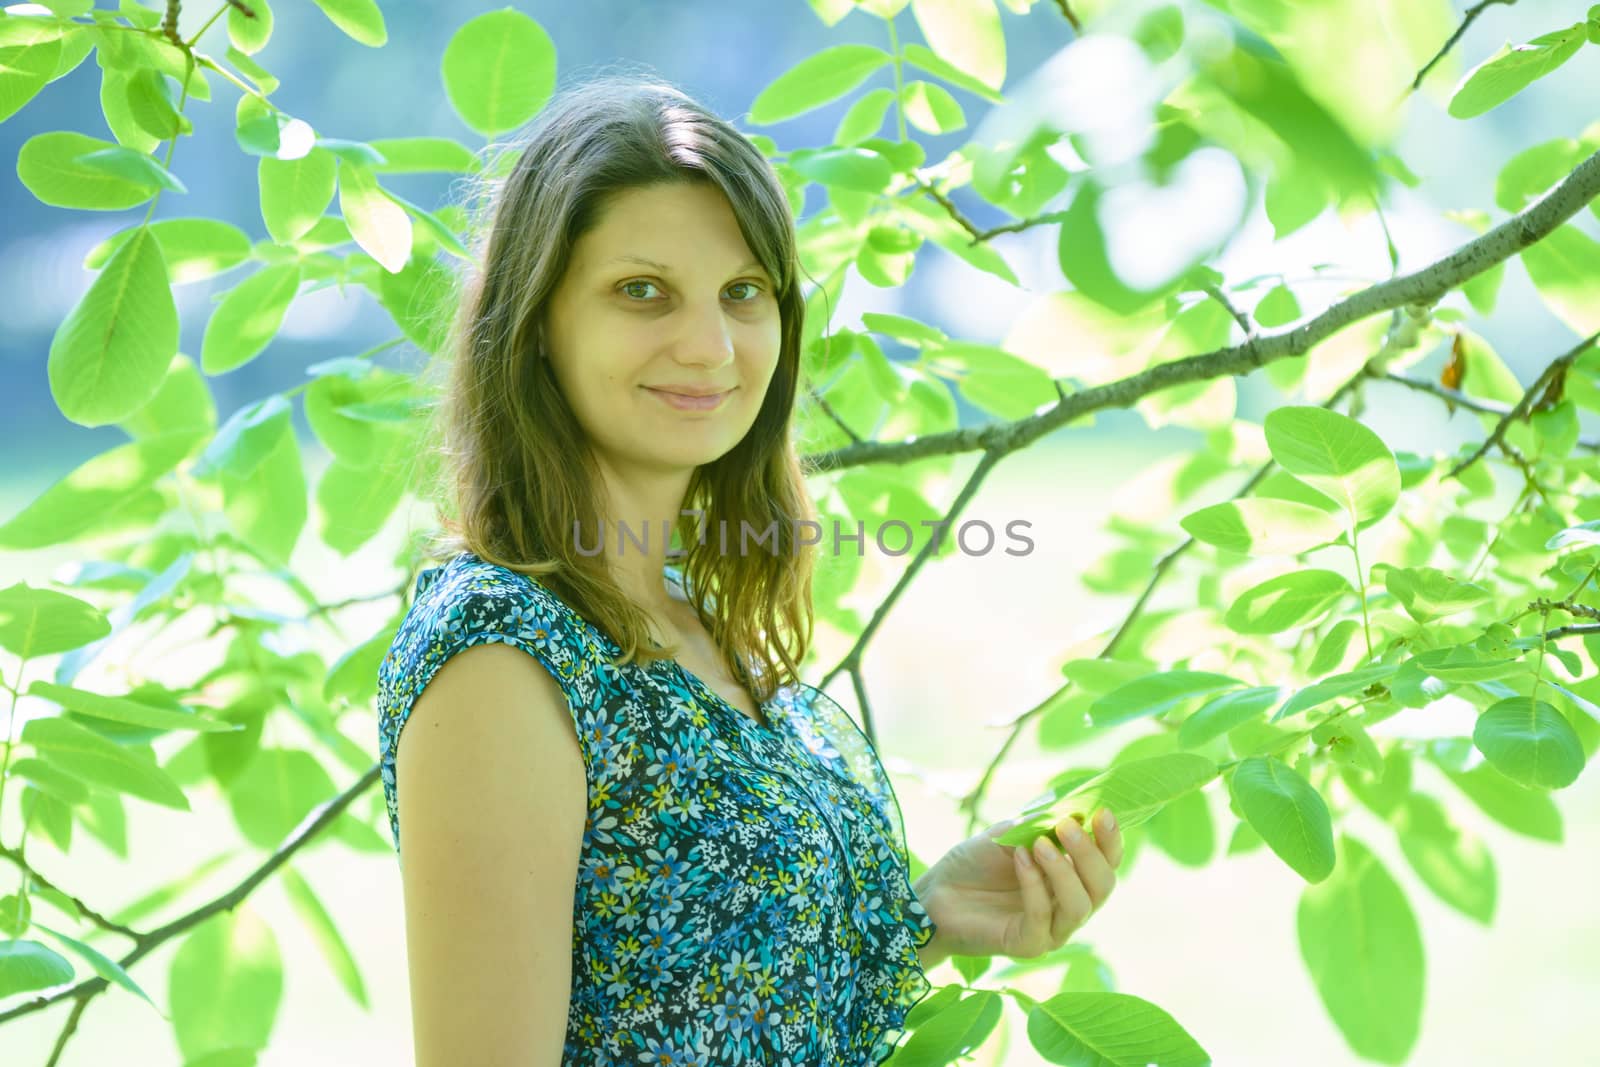 Girl smiles against a branch with green leaves in sunny weather